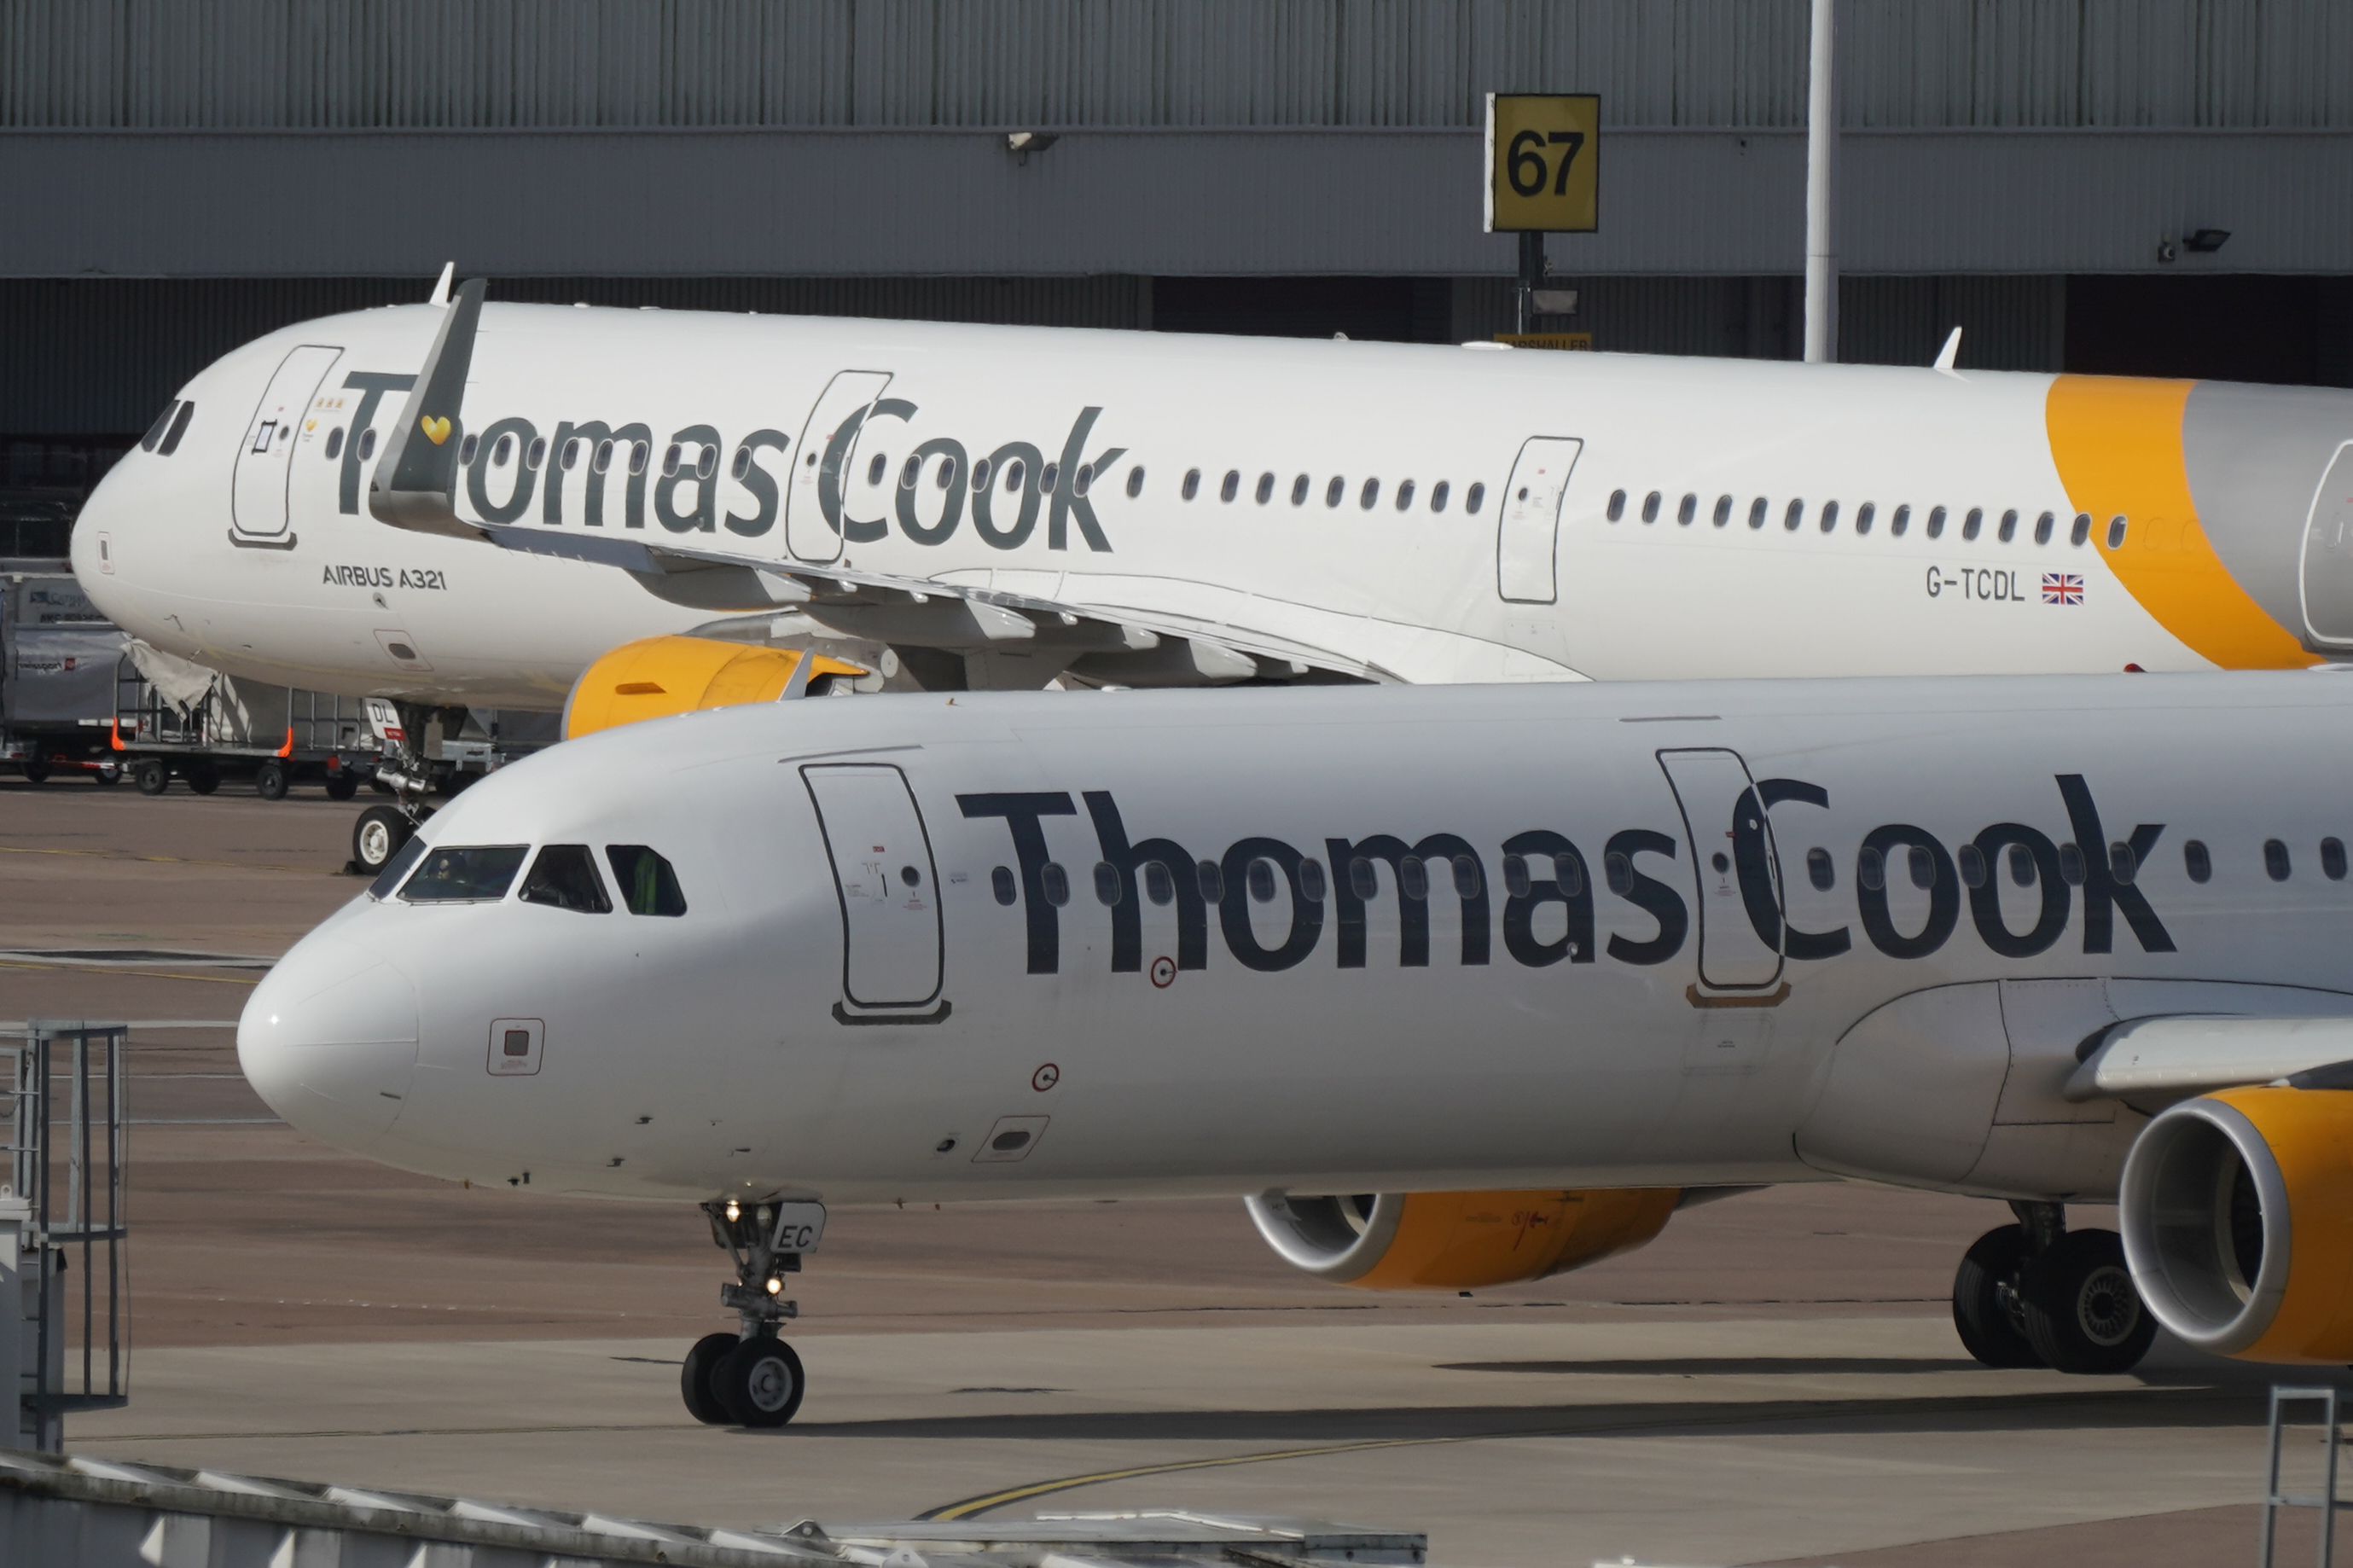 Travel Firm Thomas Cook Ceases Trading, Canceling Flights And Holidays